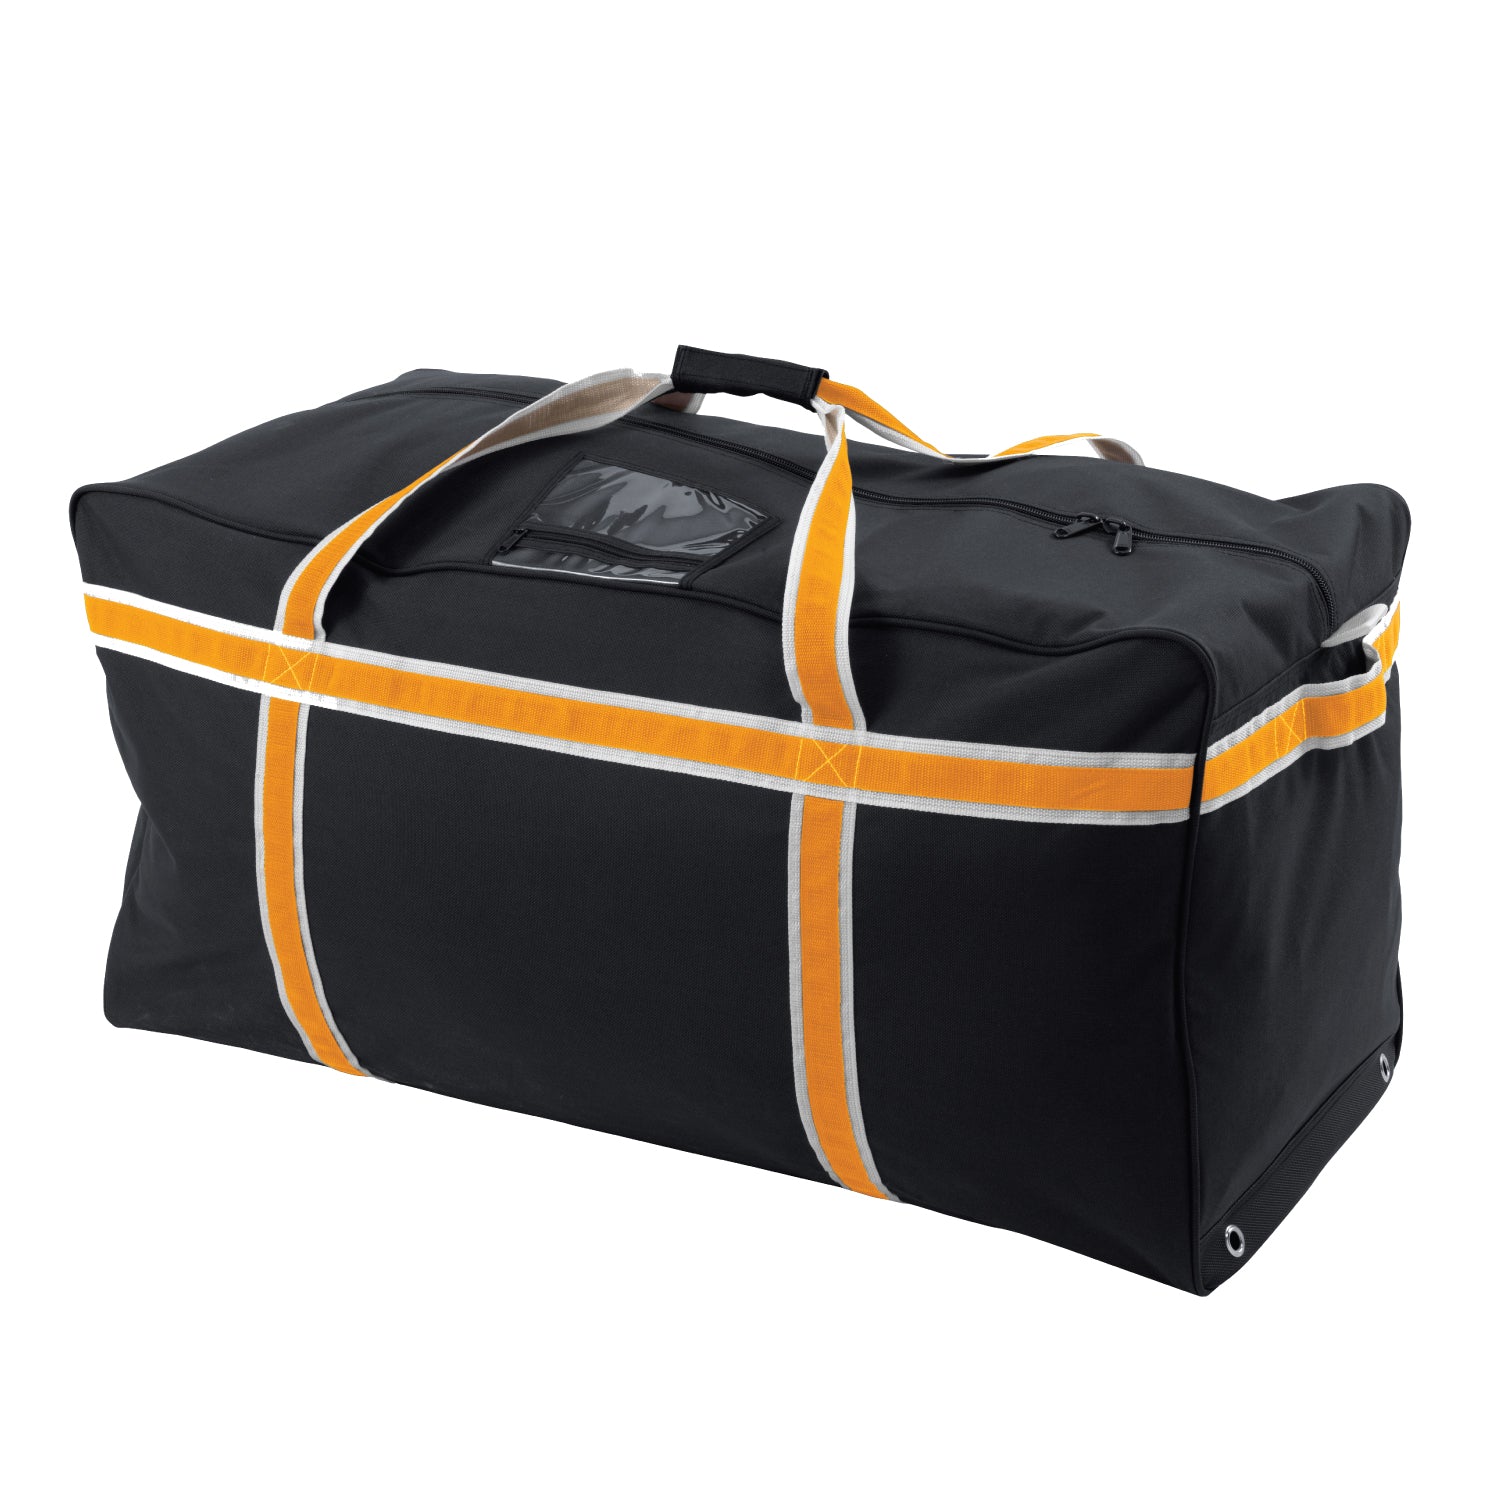 Athletic Bags & Products